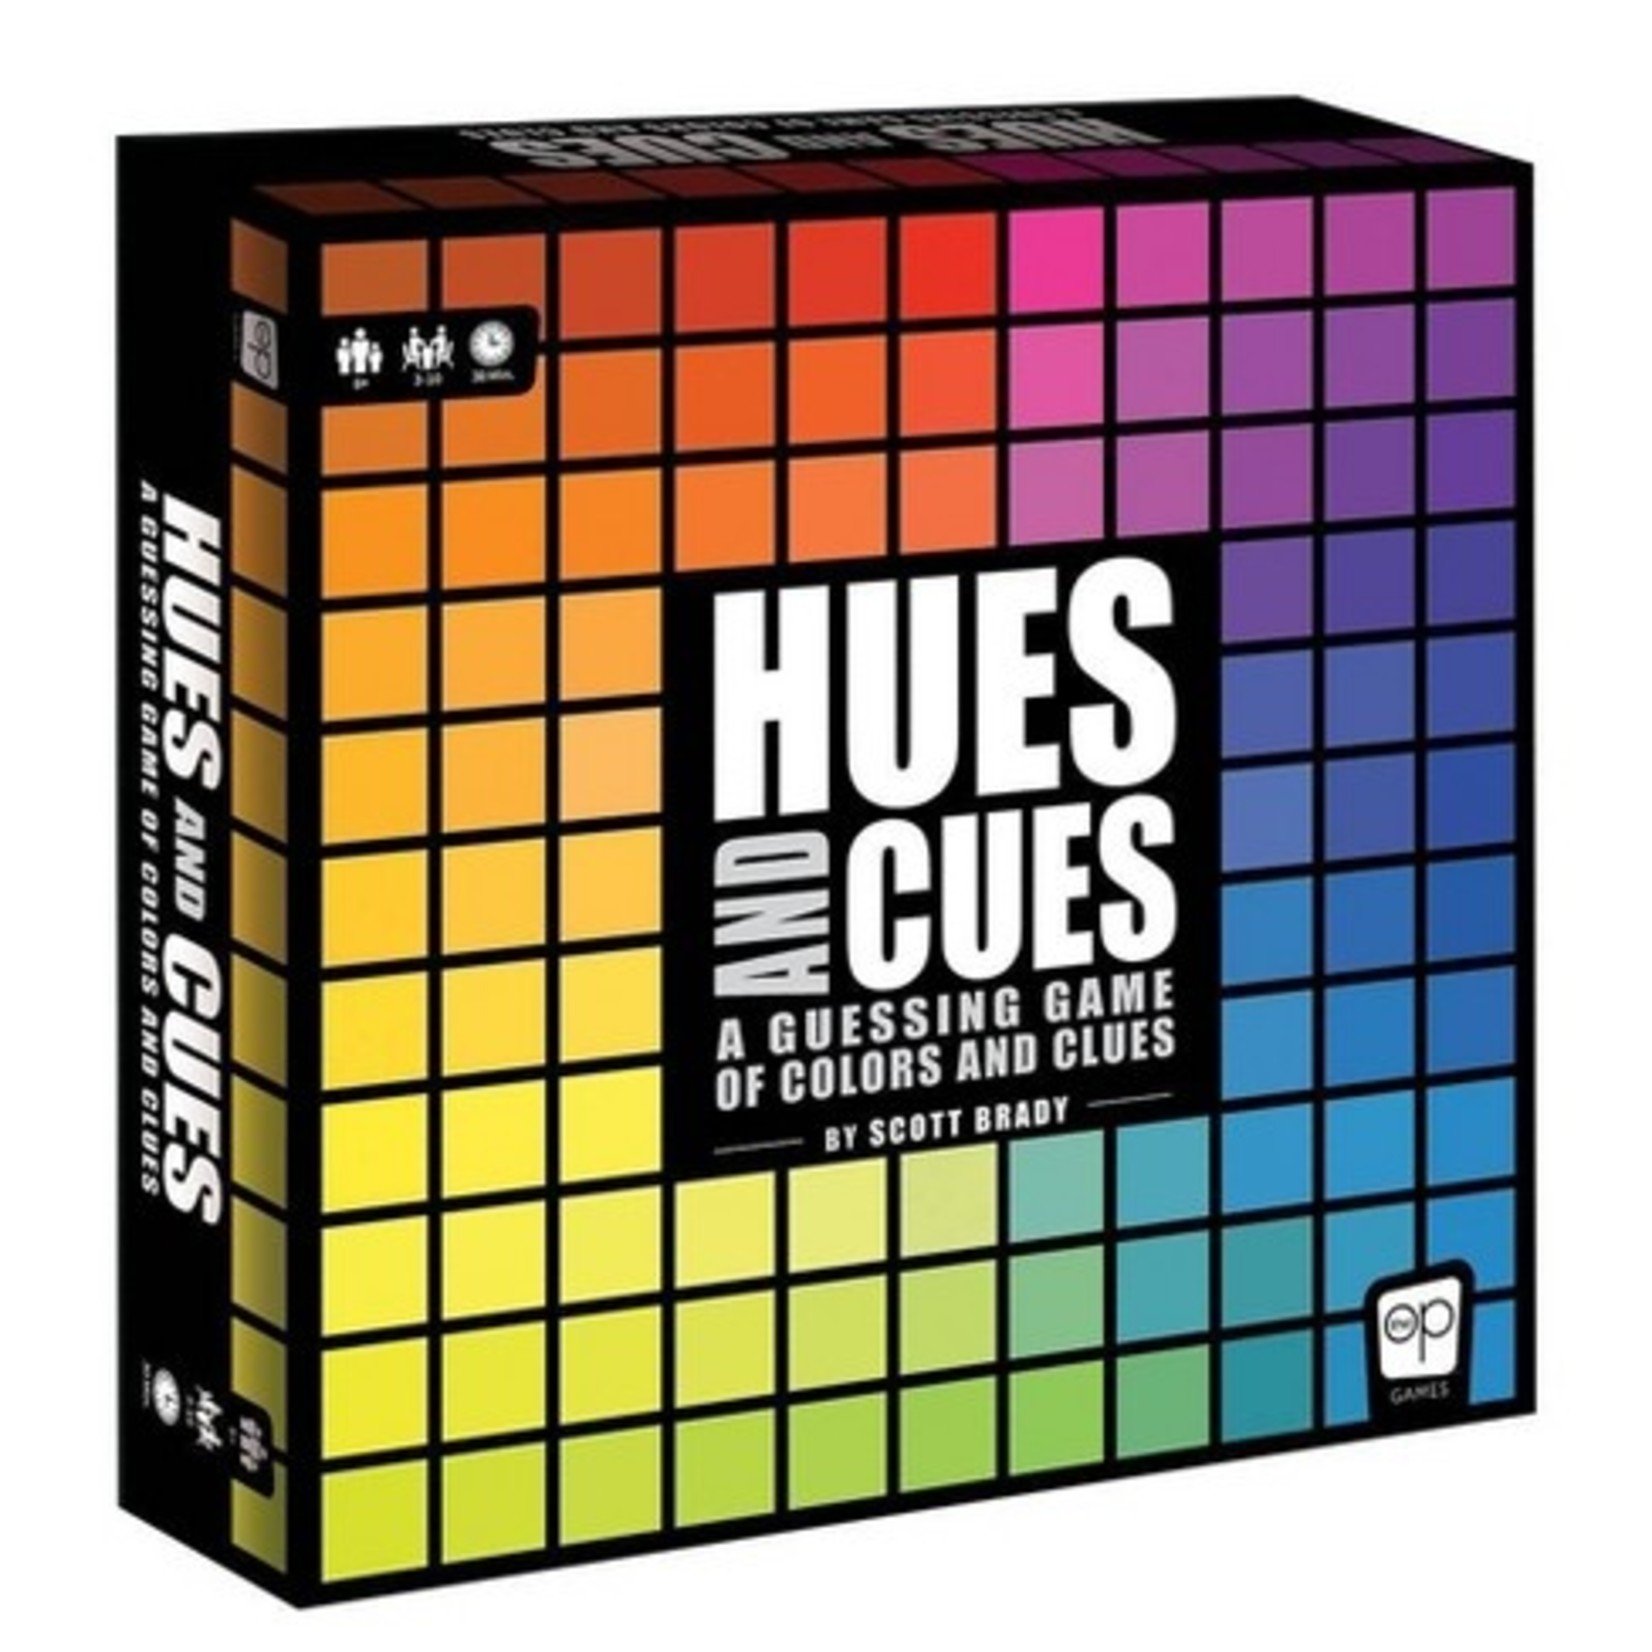 USAOpoly Hues & Cues